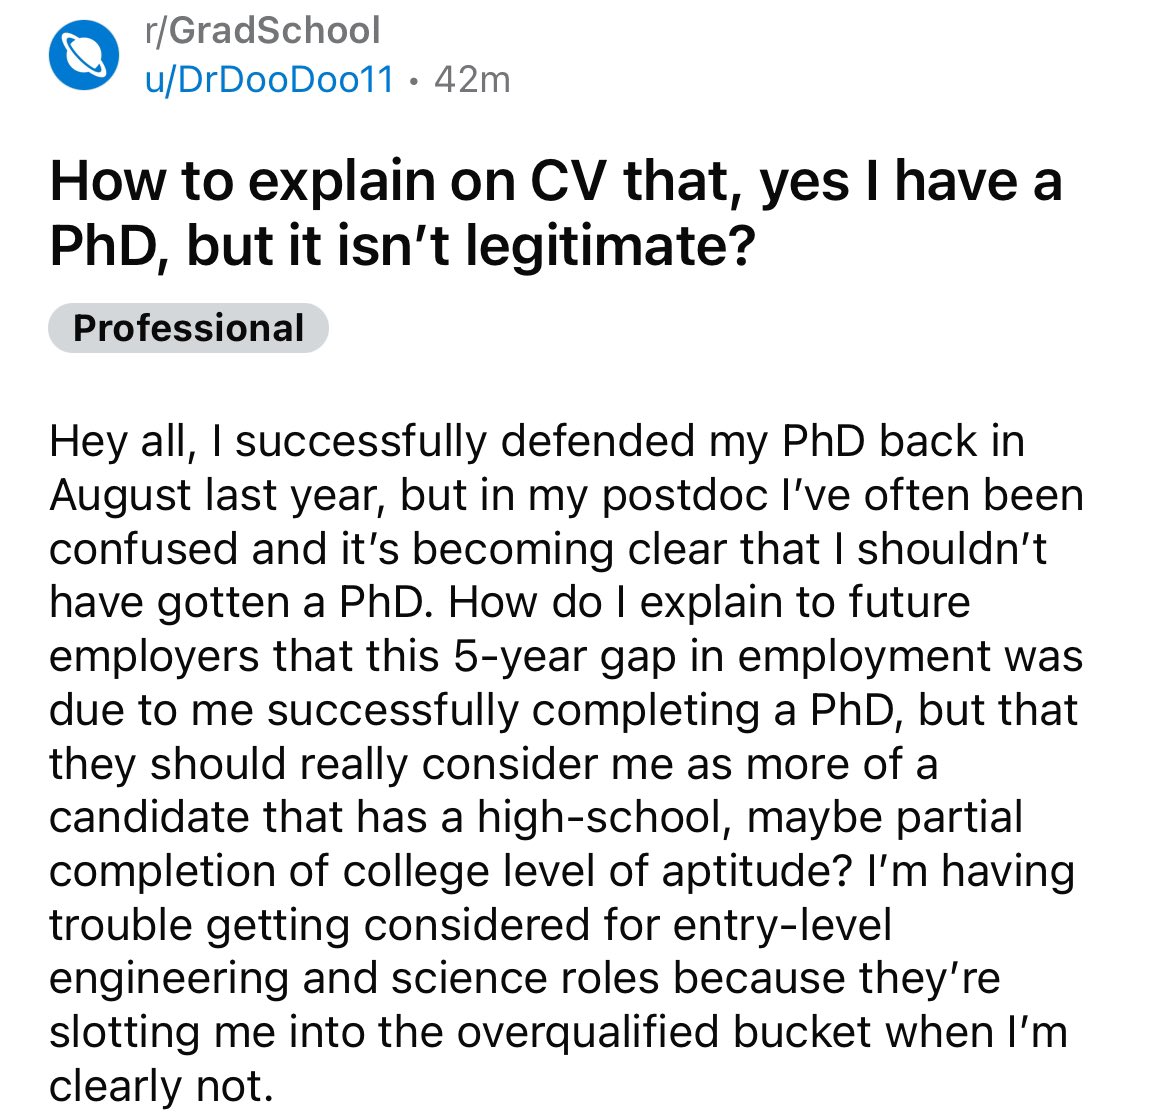 angle - rGradSchool uDrDooDoo11. 42m How to explain on Cv that, yes I have a PhD, but it isn't legitimate? Professional Hey all, I successfully defended my PhD back in August last year, but in my postdoc I've often been confused and it's becoming clear th